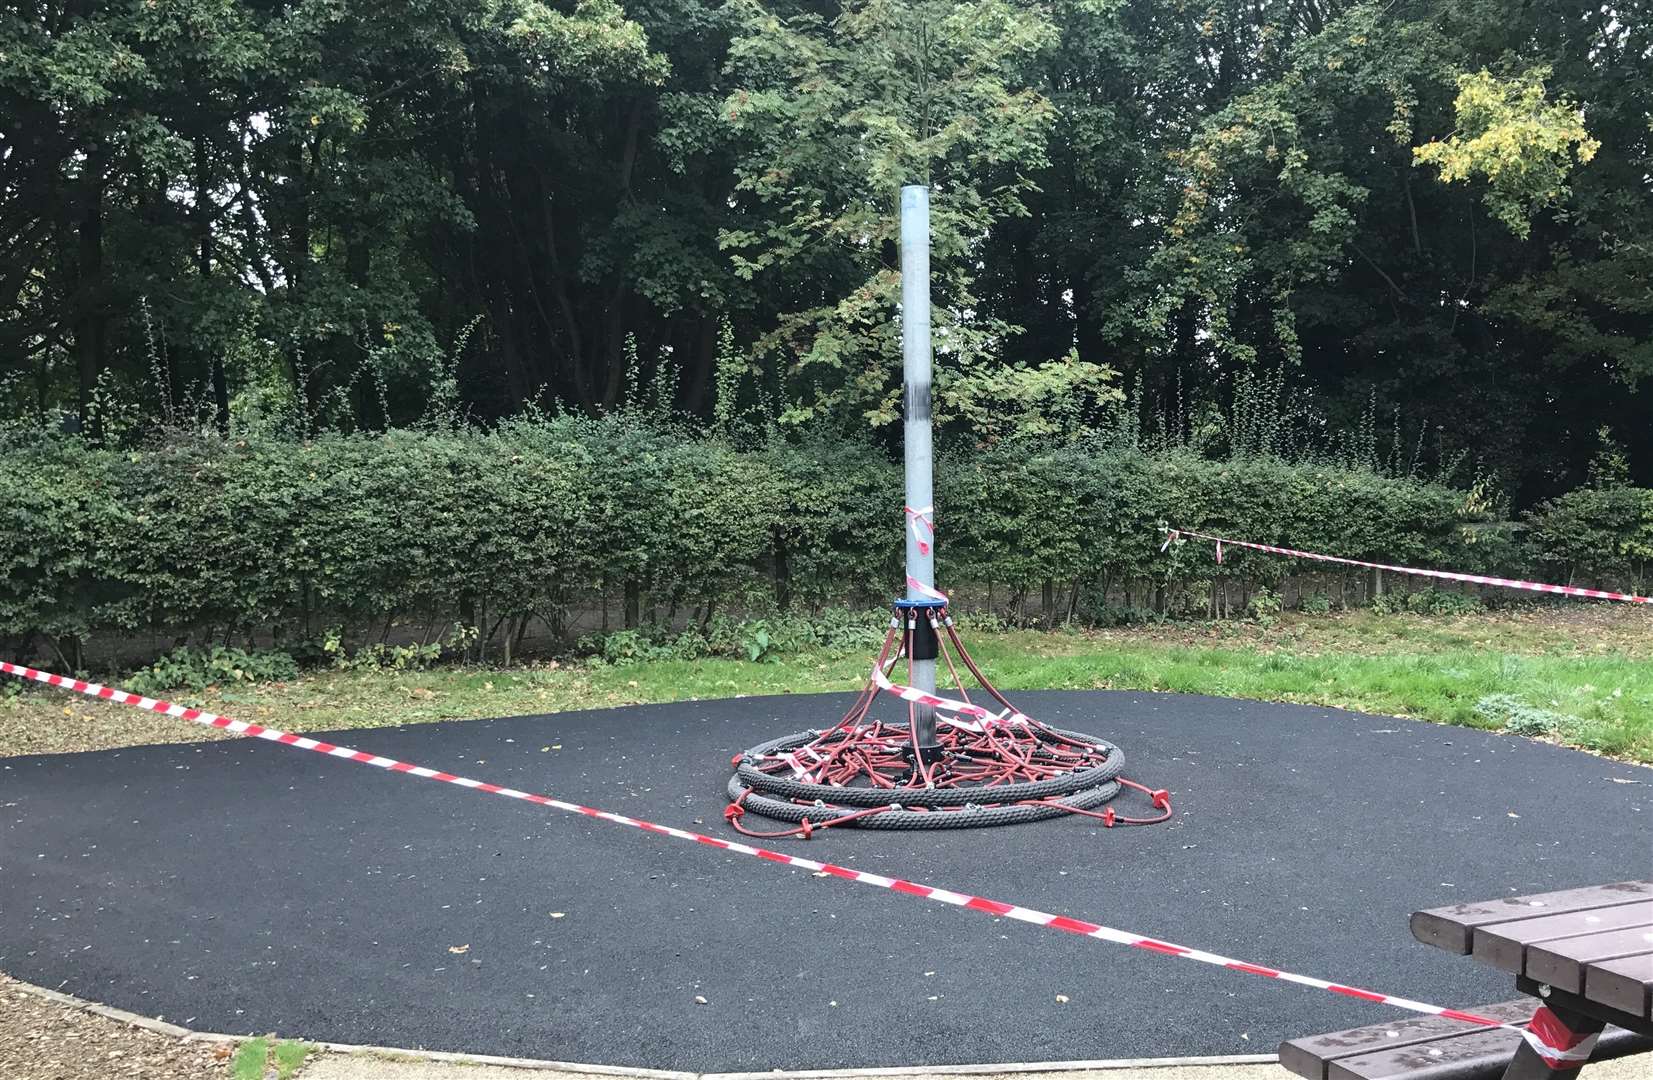 The roundabout at Riverside Country Park was cordoned off after the accident